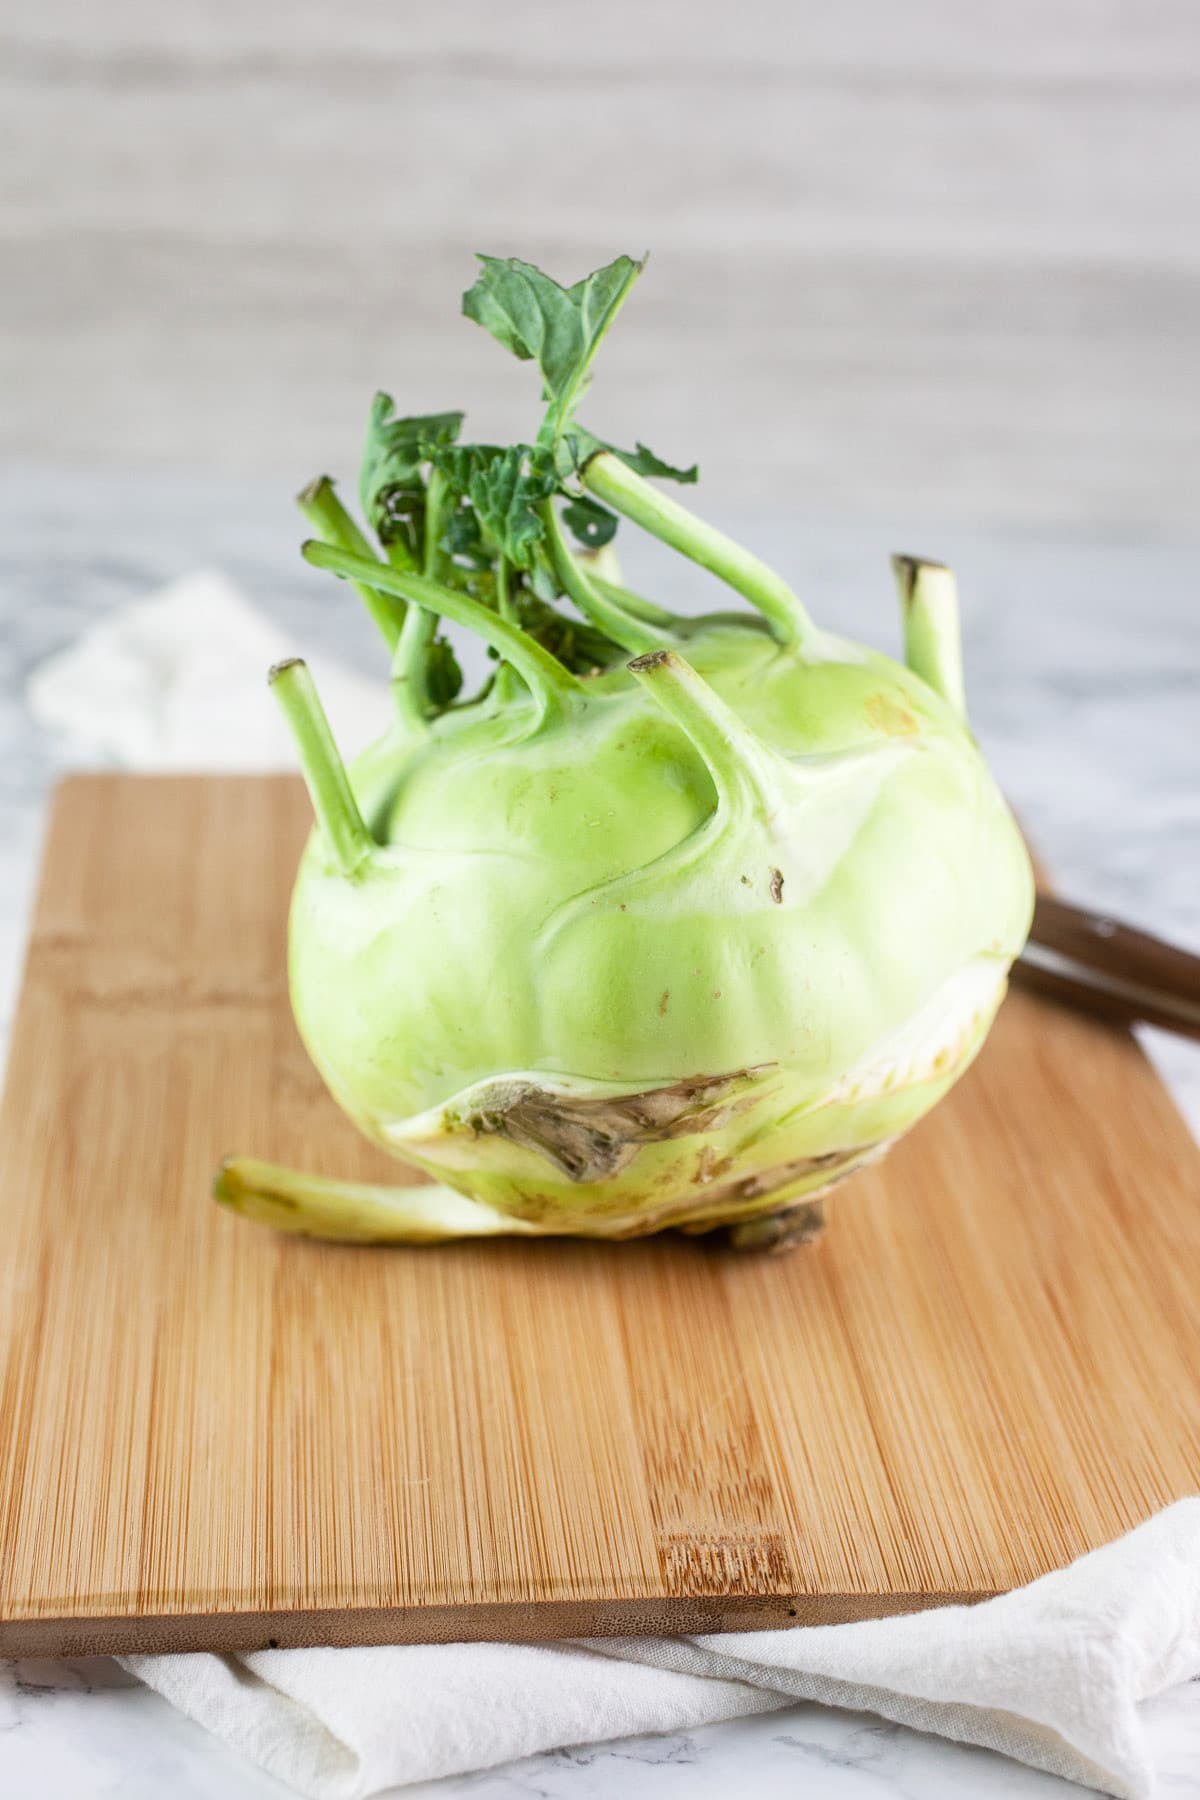 Kohlrabi on wooden cutting board with knife.